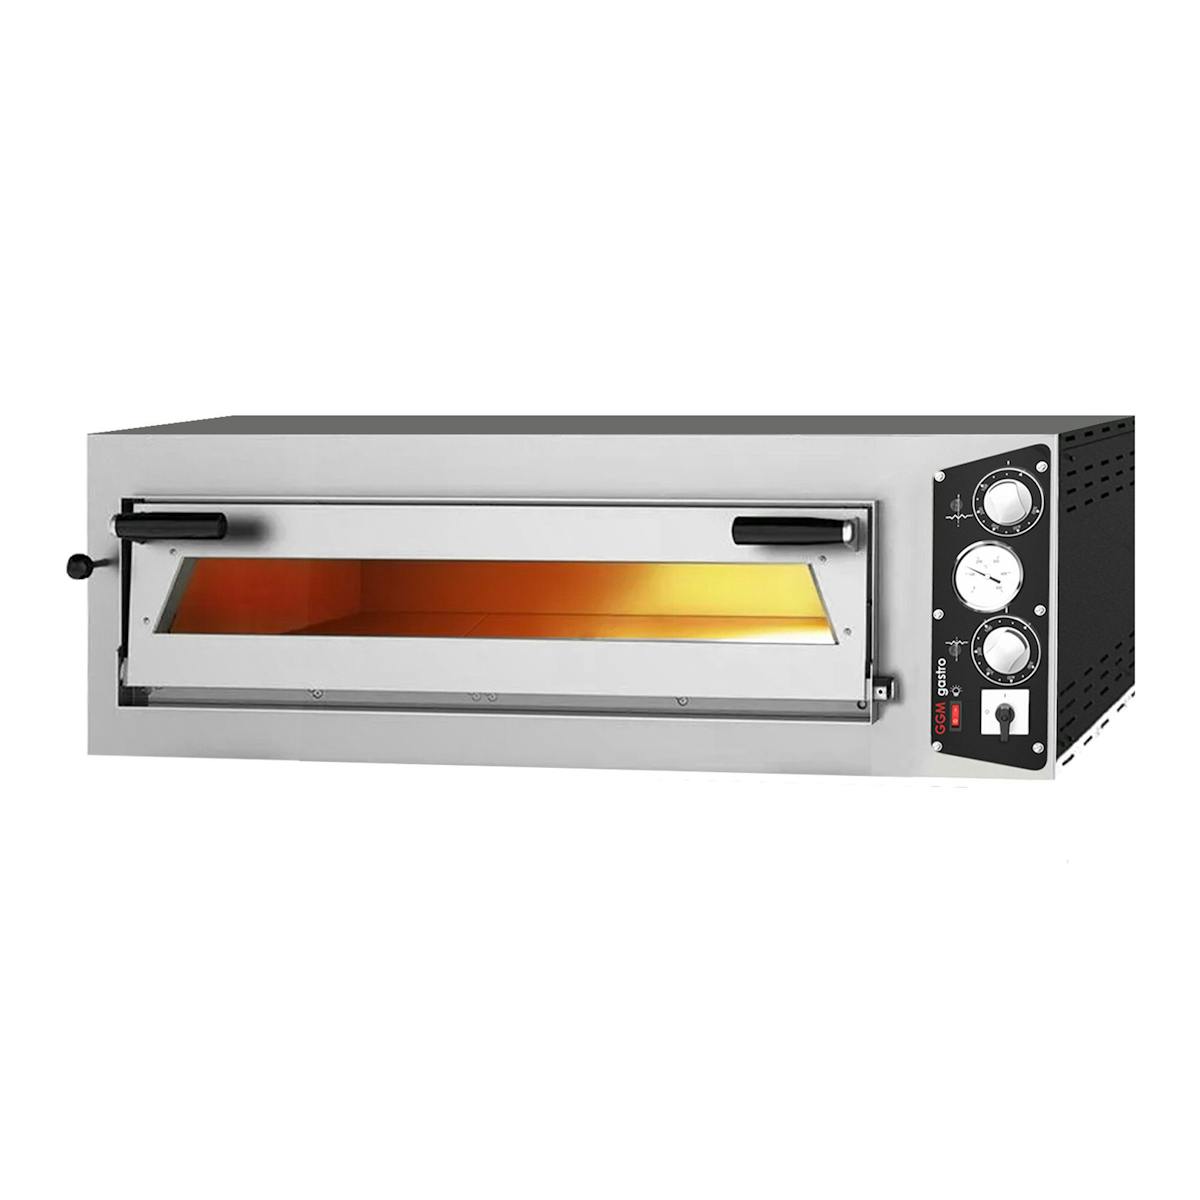 (2 pieces) Electric pizza oven - 4+4x 35cm - Manual